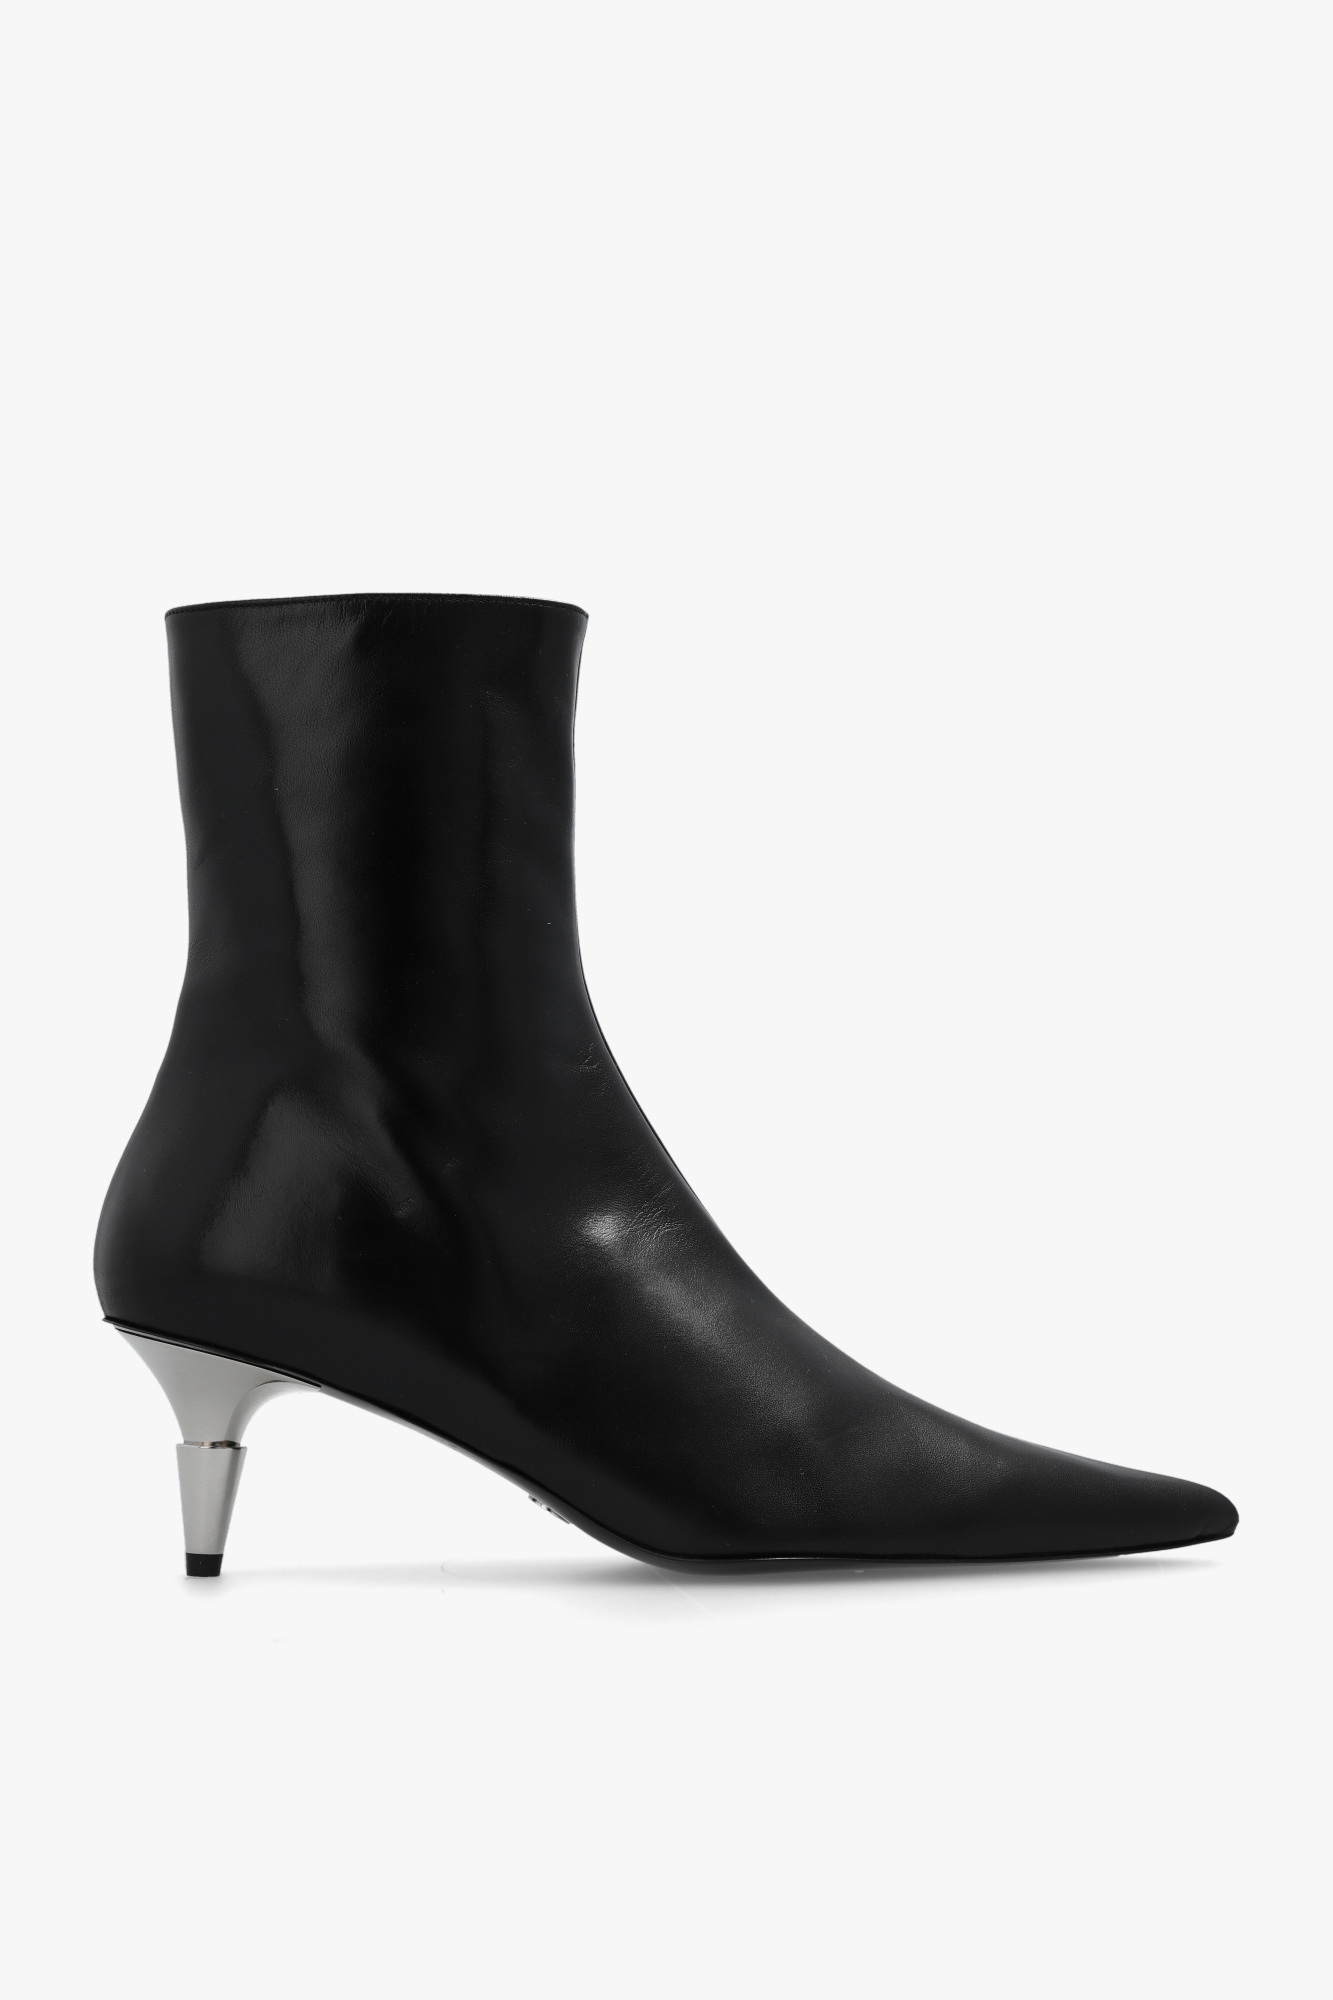 Proenza Schouler ‘Spike’ heeled ankle boots in leather